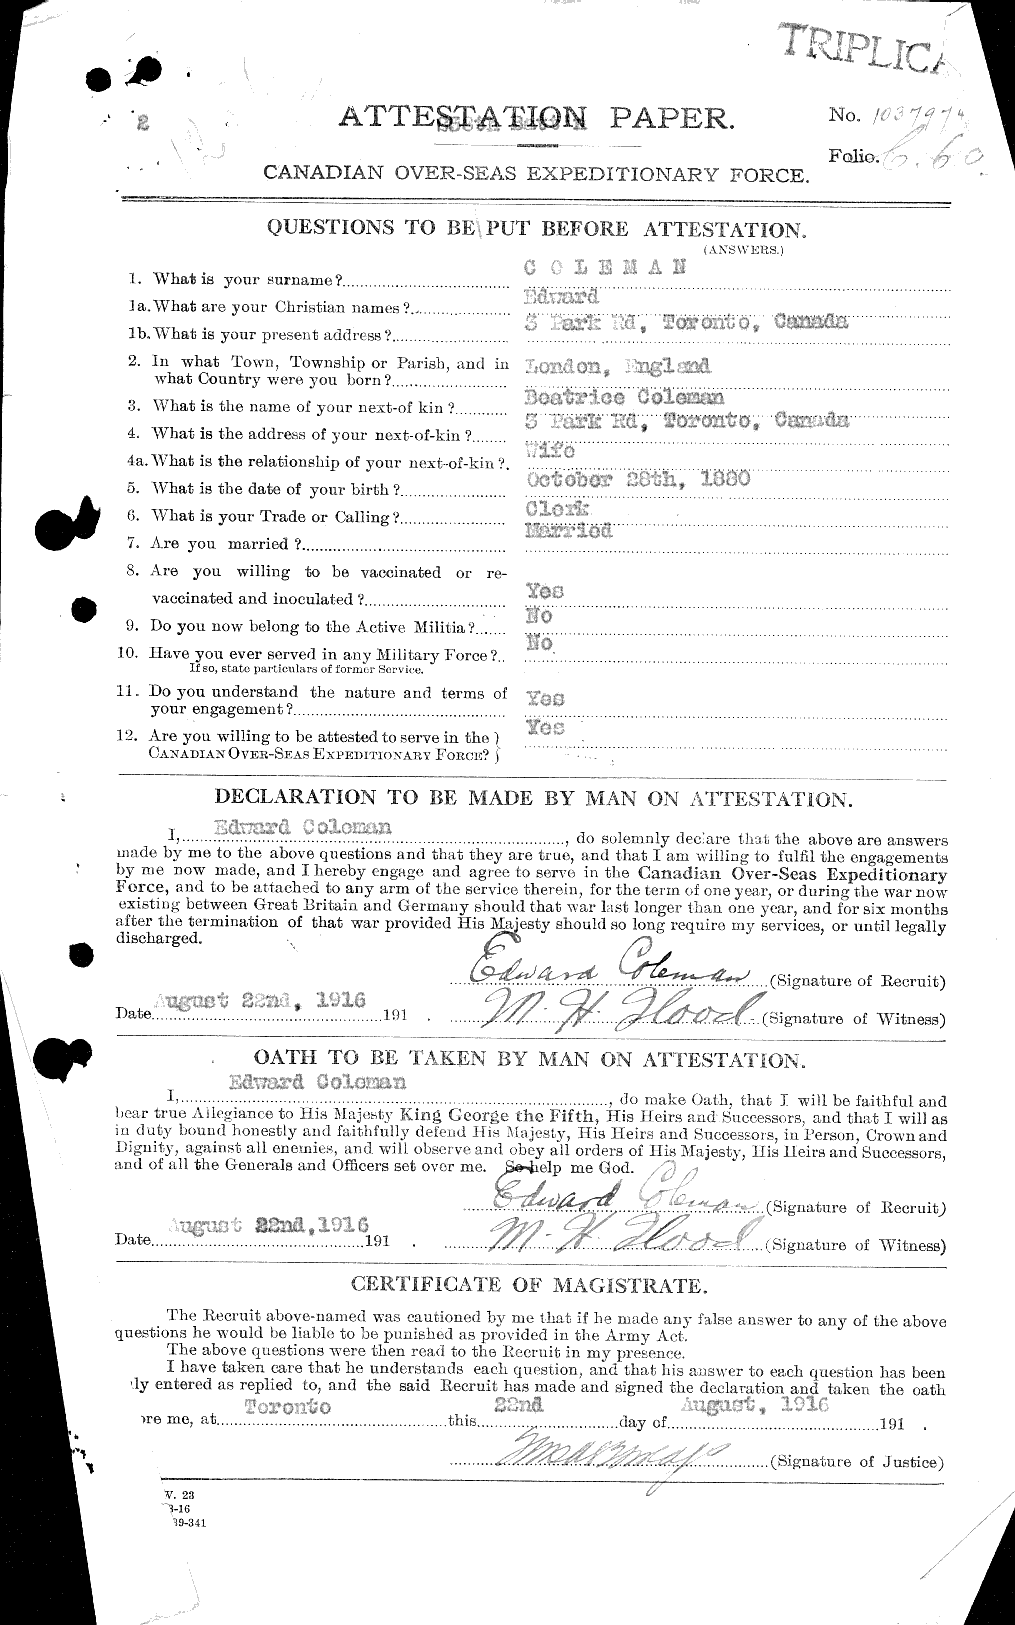 Personnel Records of the First World War - CEF 028110a